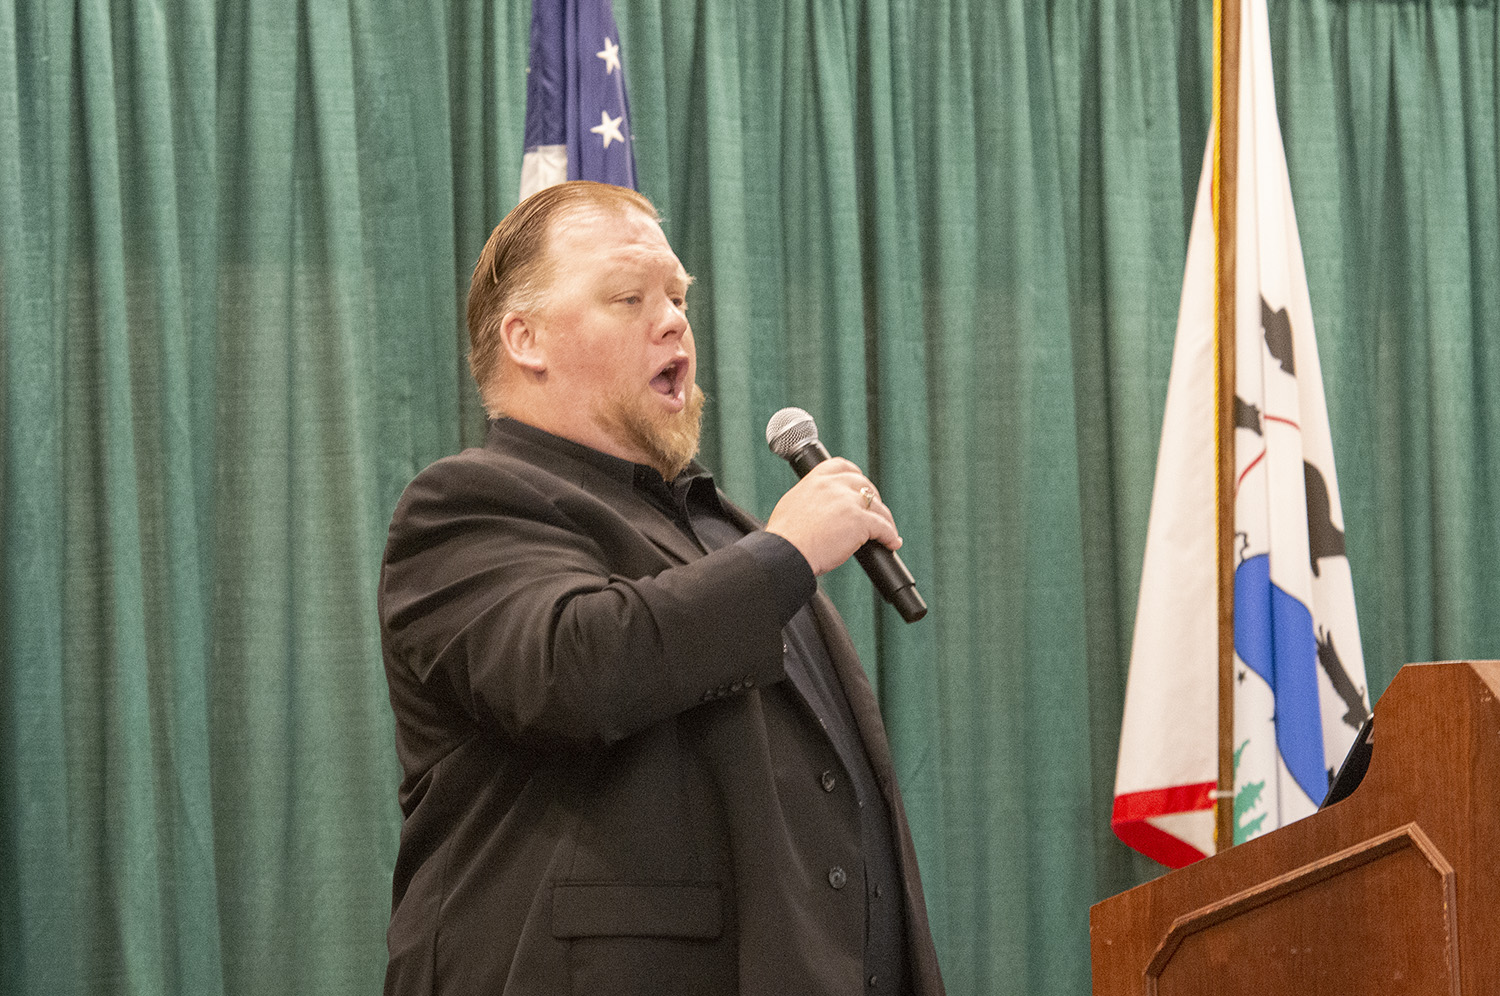 Dr. Cory Renbarger, professor of music, performs the National Anthem at the beginning of Bemidji State University's traditional Fall Startup Breakfast